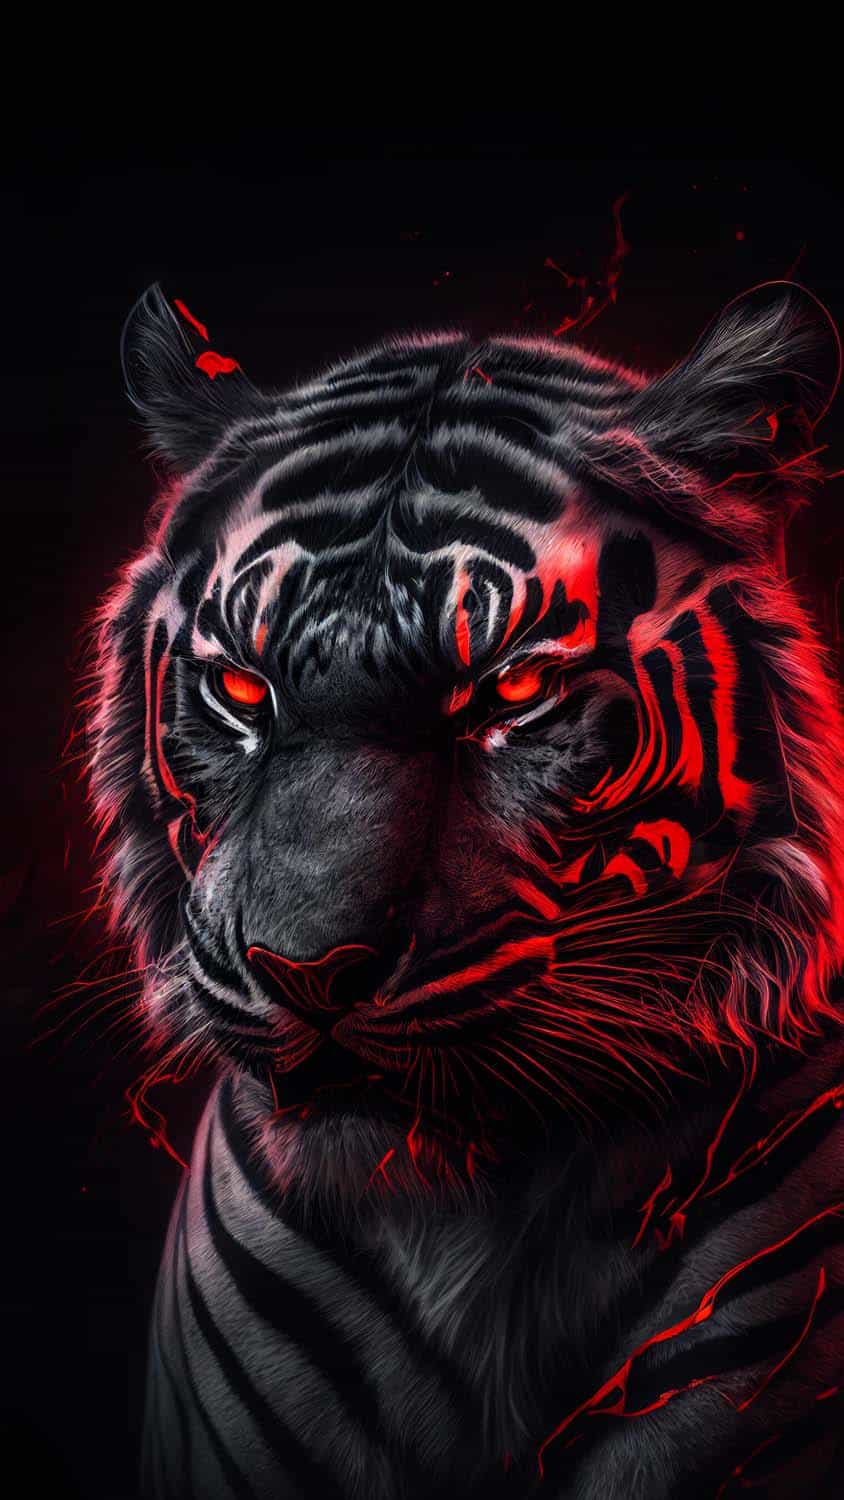 The Tiger iPhone Wallpaper HD